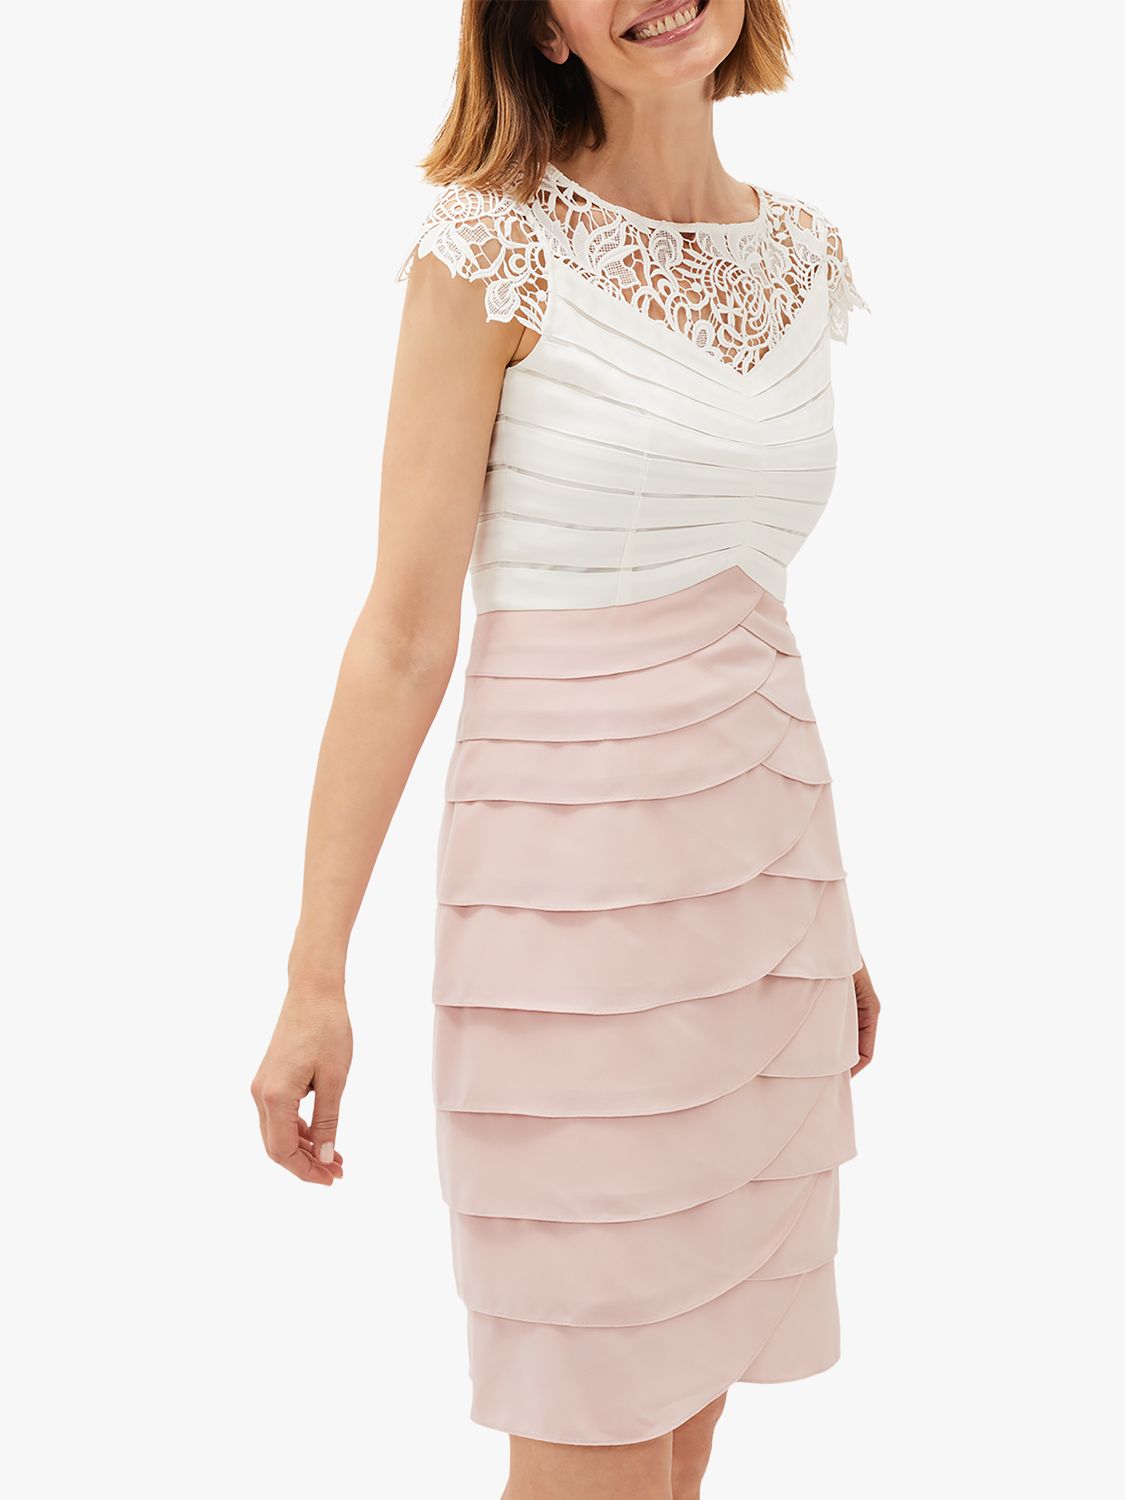 Phase Eight Faith Contrast Lace Dress, Ivory/Antique Rose, 10